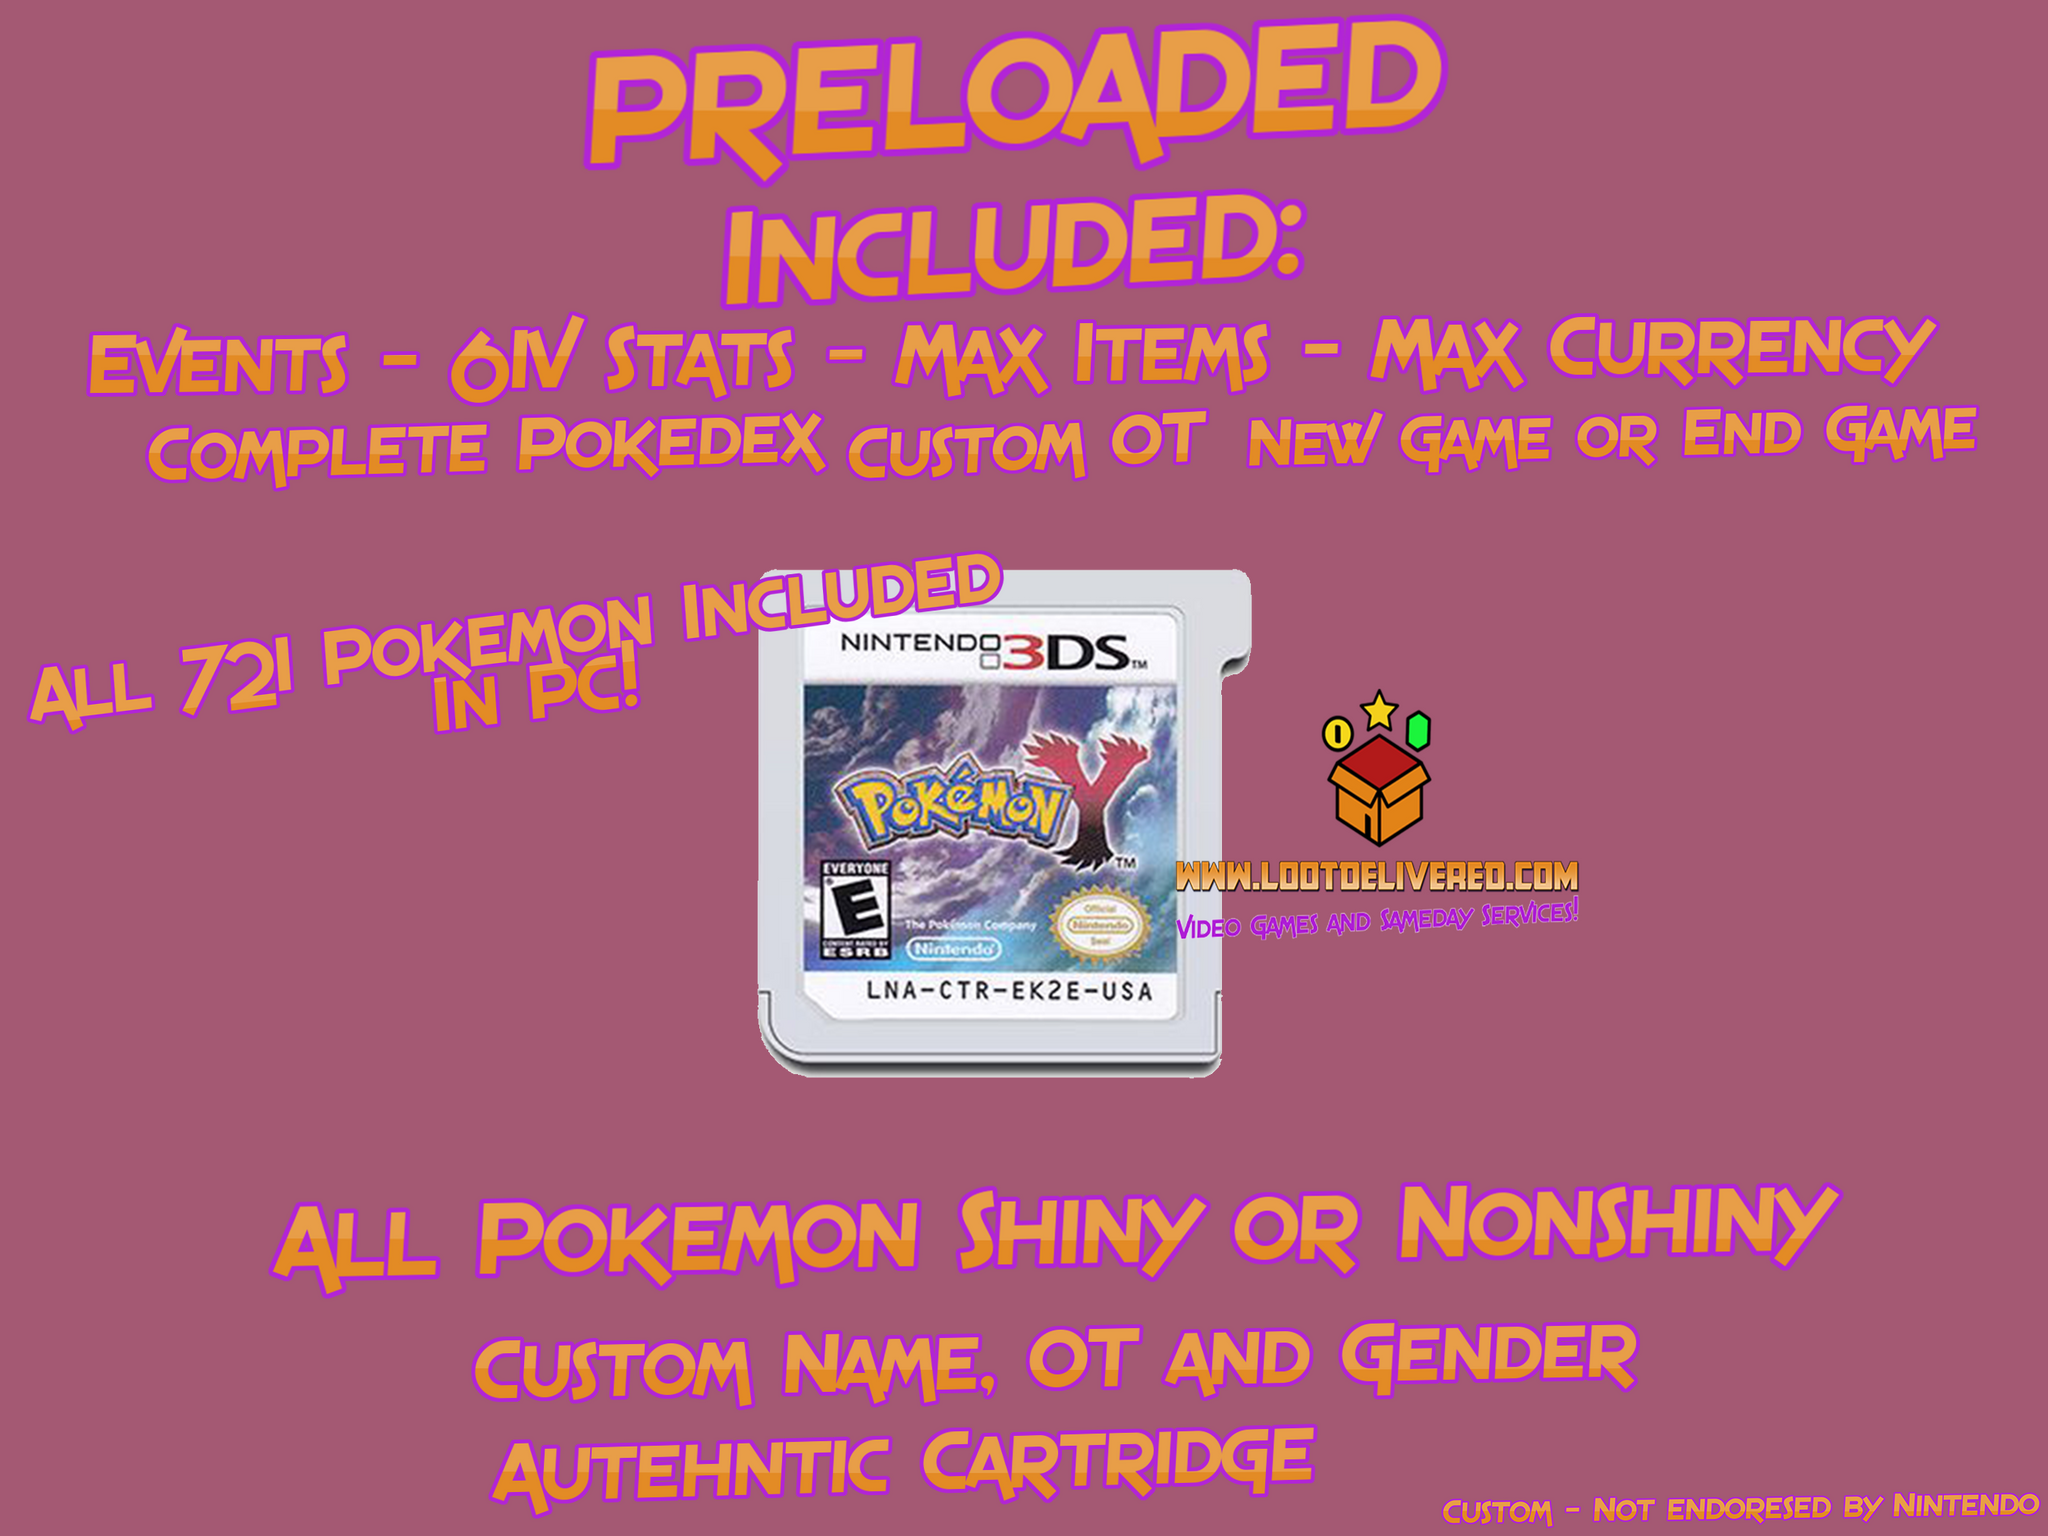 Pokemon Y Loaded With (Physcial Enhanced Event Game) - Legit Enhanced! All Pokemon 721 + 3DS